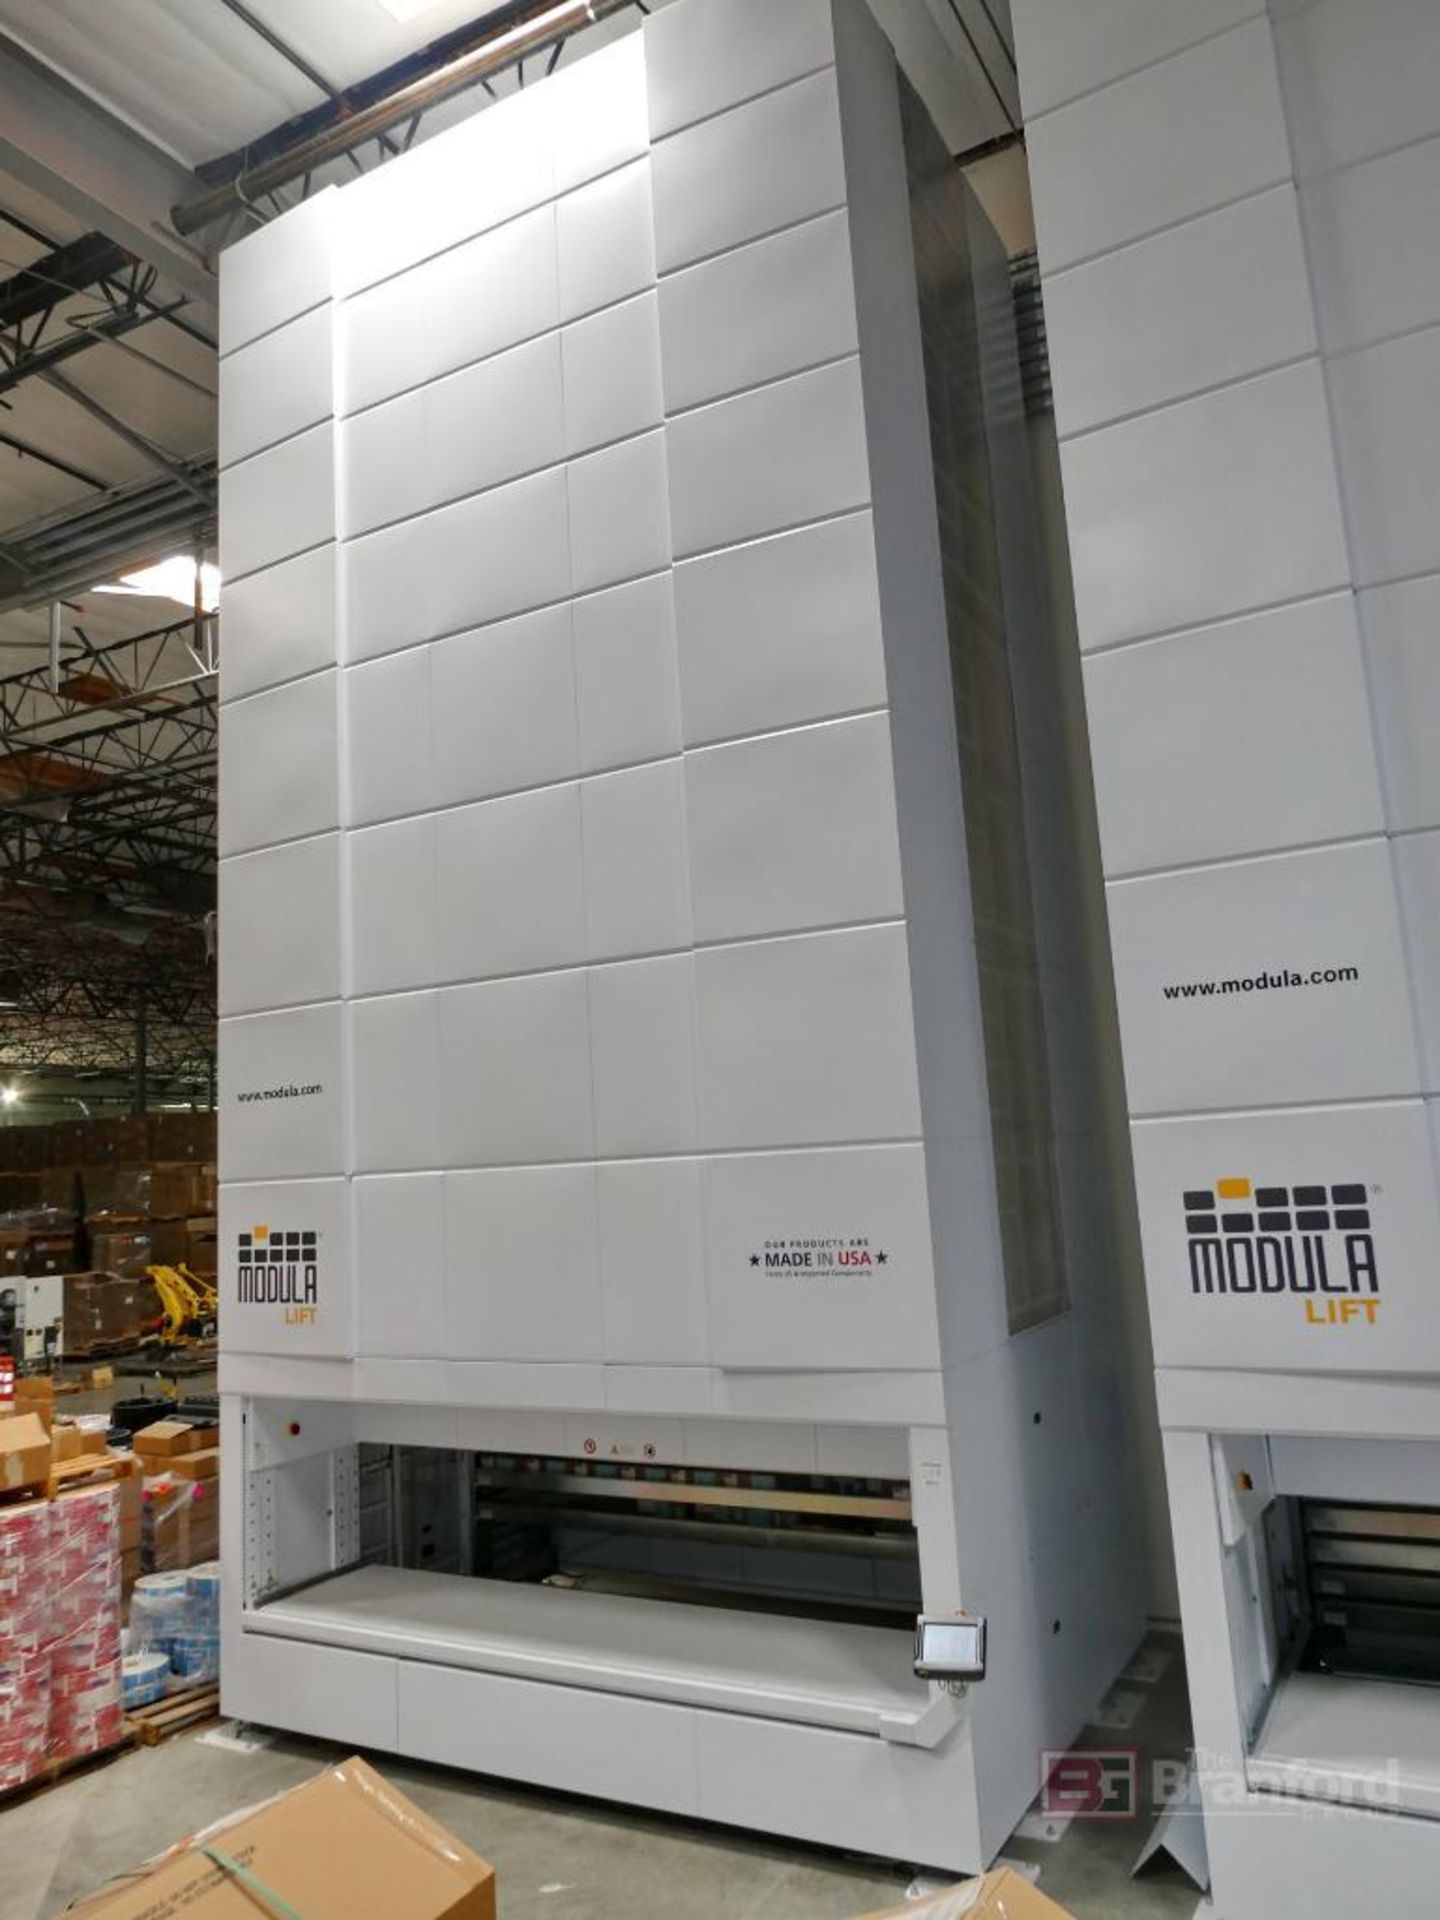 2021 Modula Lift Model ML50D, Automated Vertical Carousel Storage System - Image 2 of 9